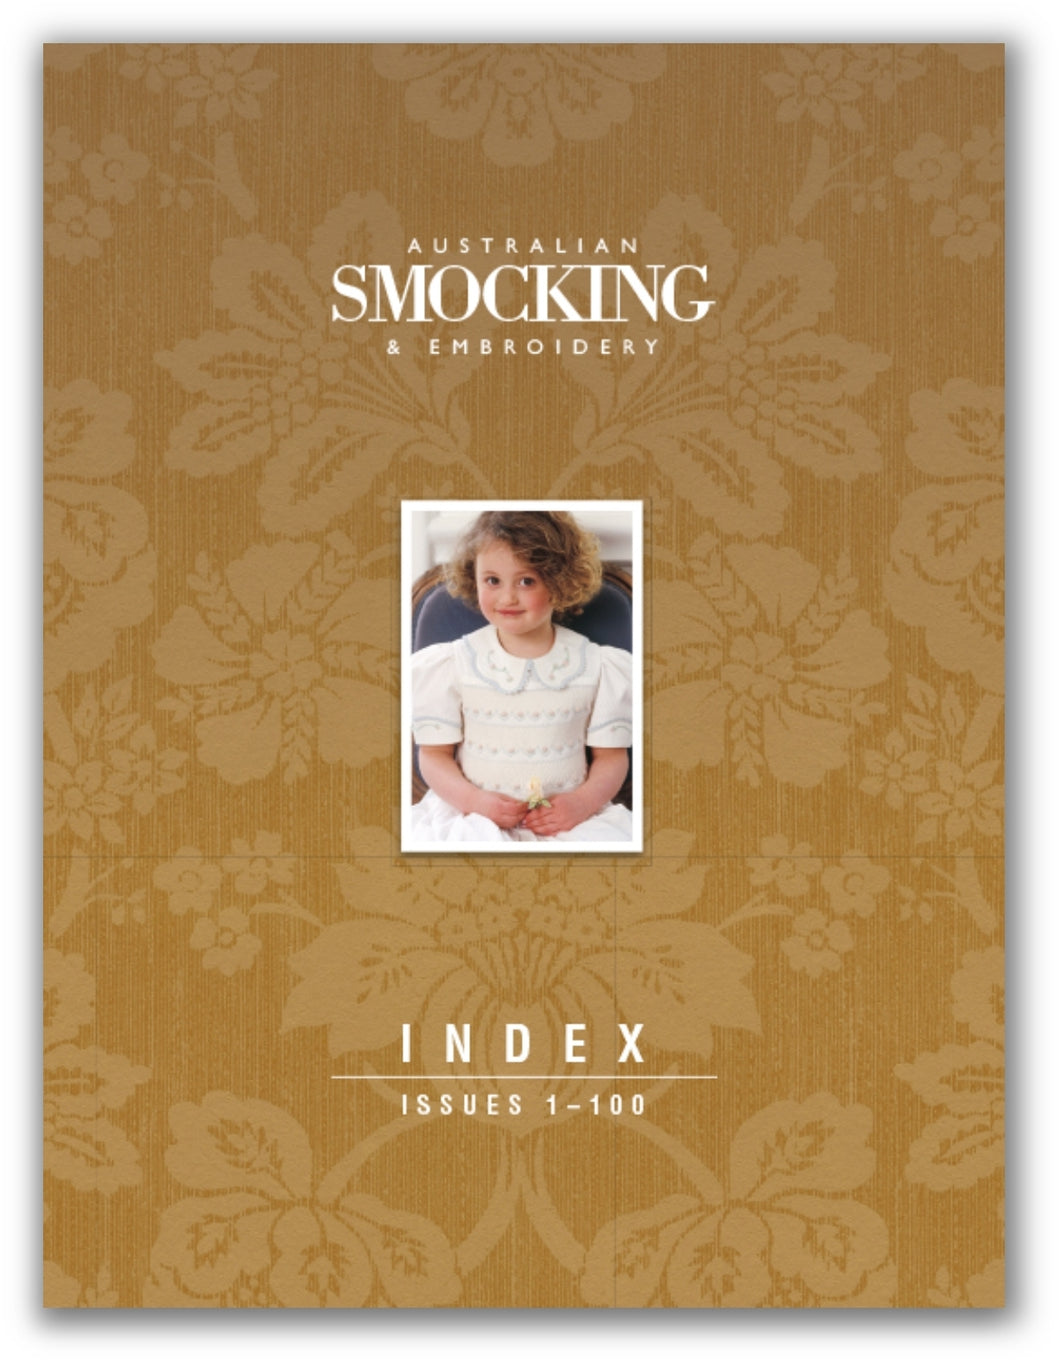 Australian Smocking and Embroidery Index